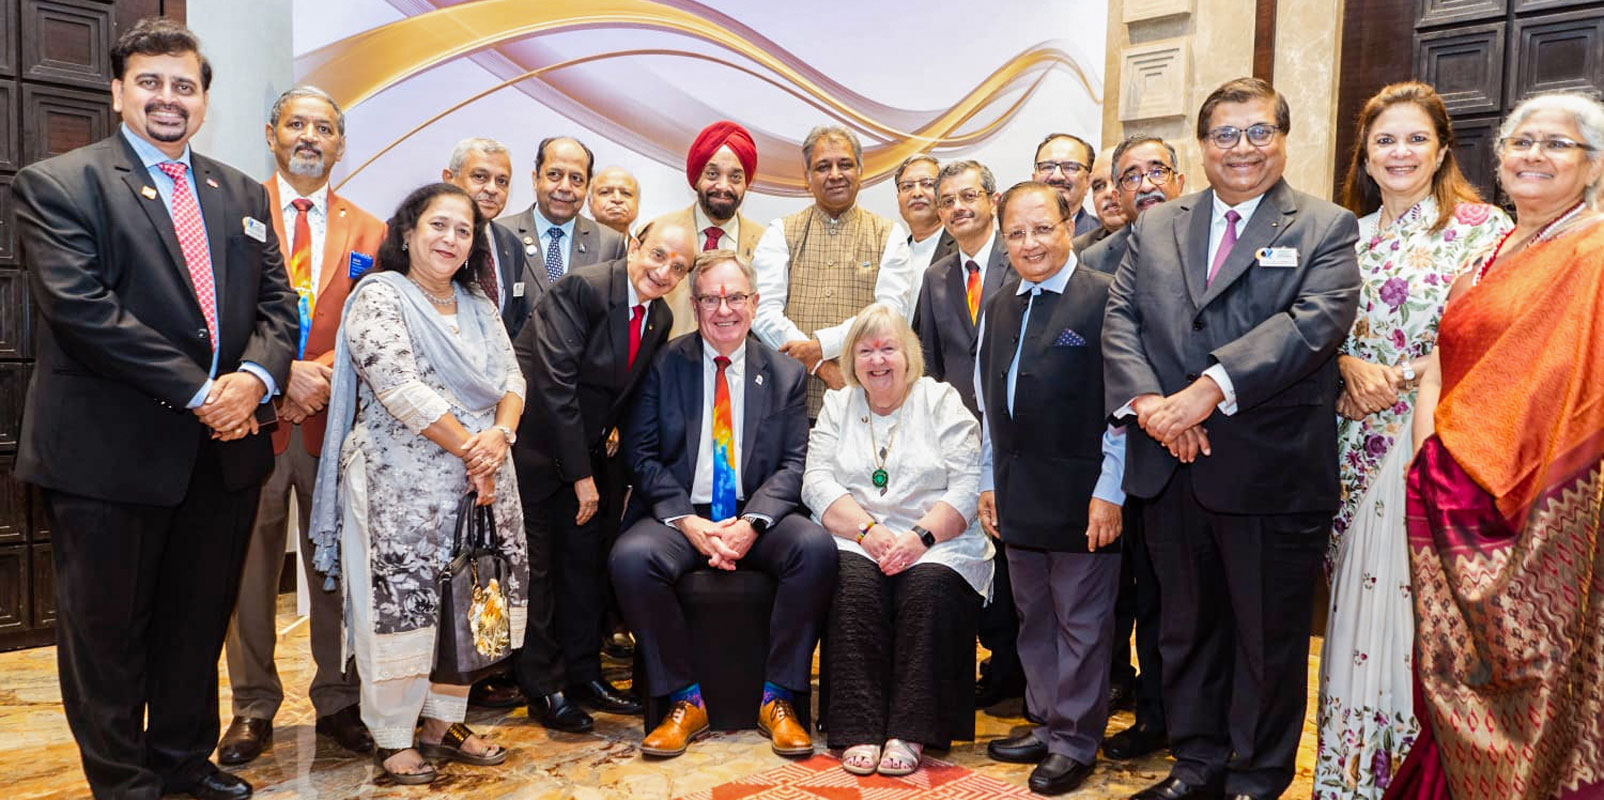 Below: RIPE McInally and Heather with PRID Ashok Mahajan, TRF trustee Bharat Pandya, RIDE Subramanian, his wife Vidhya (right), DG Sandip Agarwalla, his wife Malini, and past governors of RID 3141. DGN Chetan Desai and DGE Arun Bhargava are seen on the left.